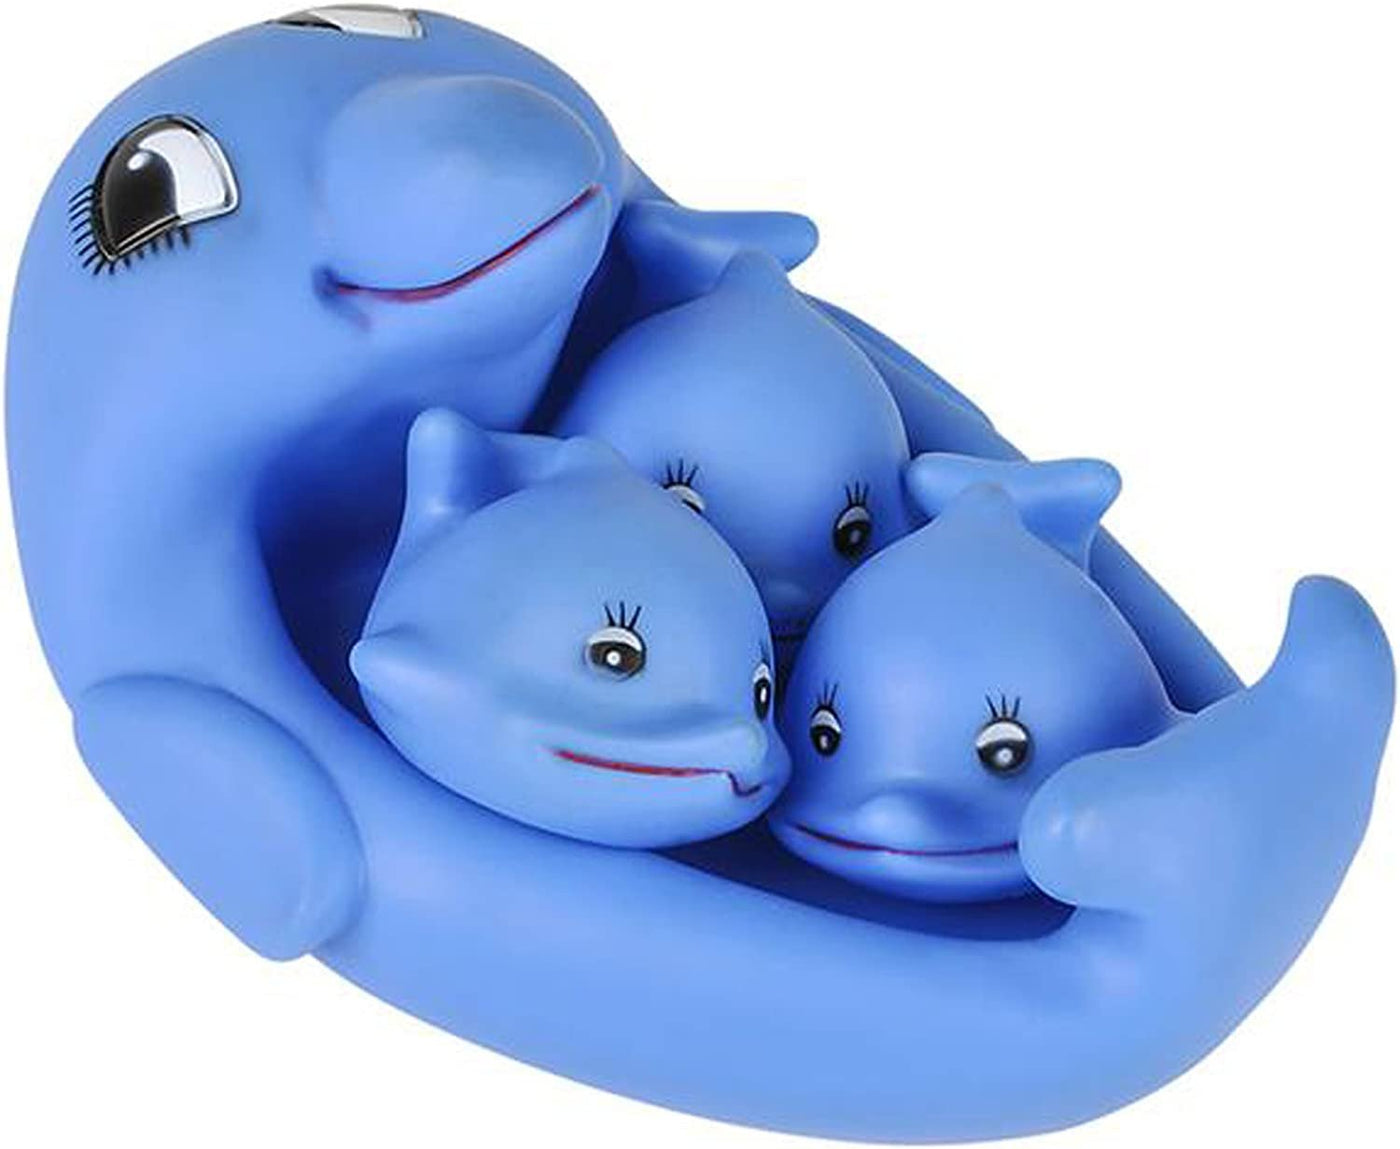 Floating Dolphin Bath Play Set - 4 Piece Fun Water Bathtub Toys for Kids - Non Toxic Playing Kit for Tub, Pool, Beach - Great Gift Idea for Boys, Girls, Toddlers, Babies - Blue